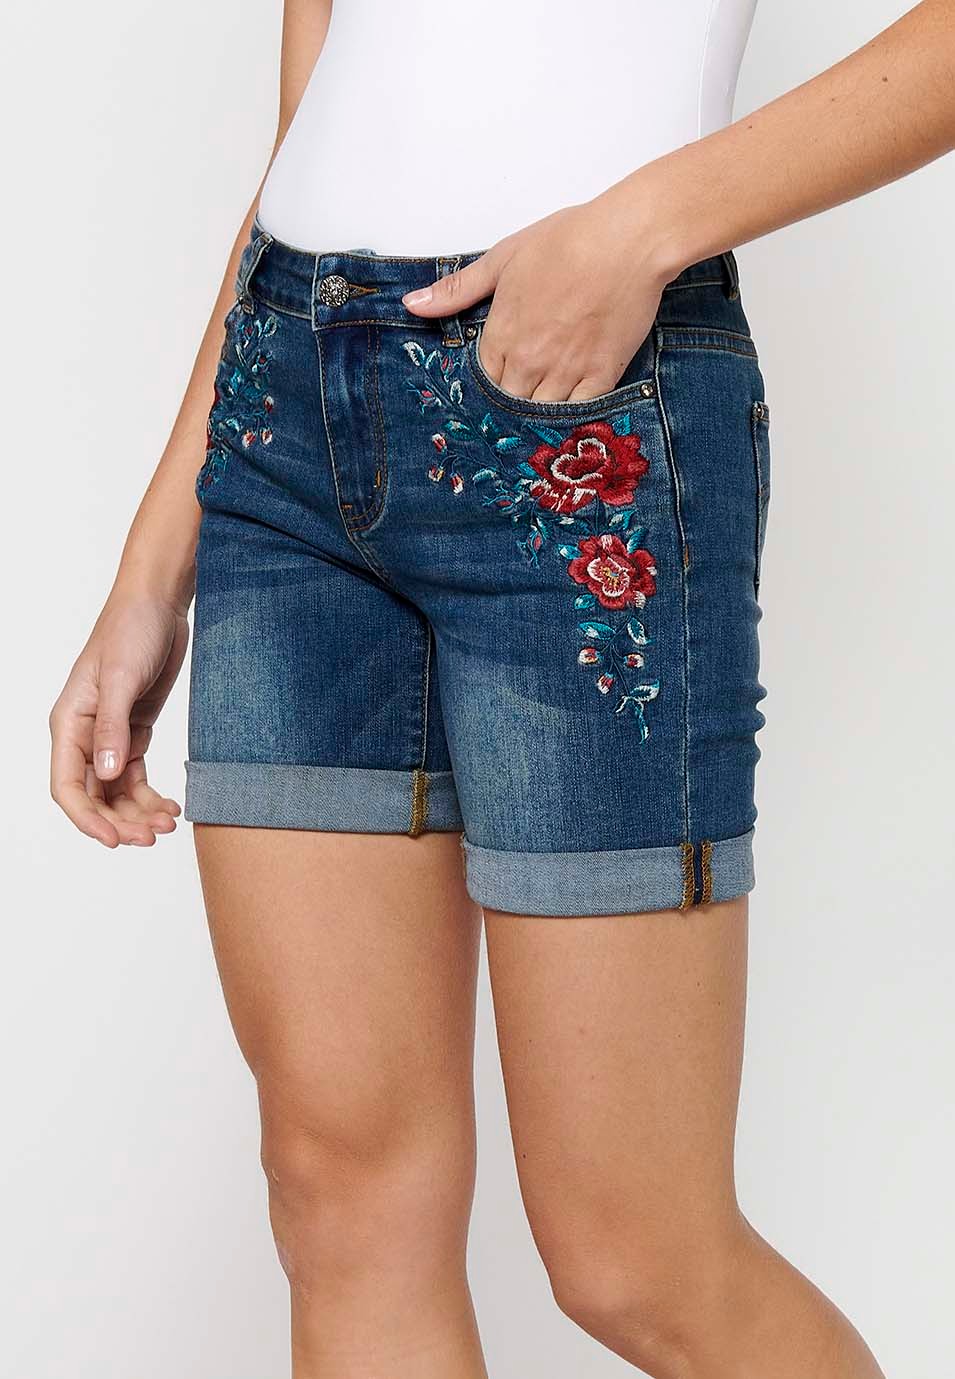 Denim shorts with front zipper and button closure and front floral embroidered details with five pockets, one pocket pocket, Dark Blue for Women 1